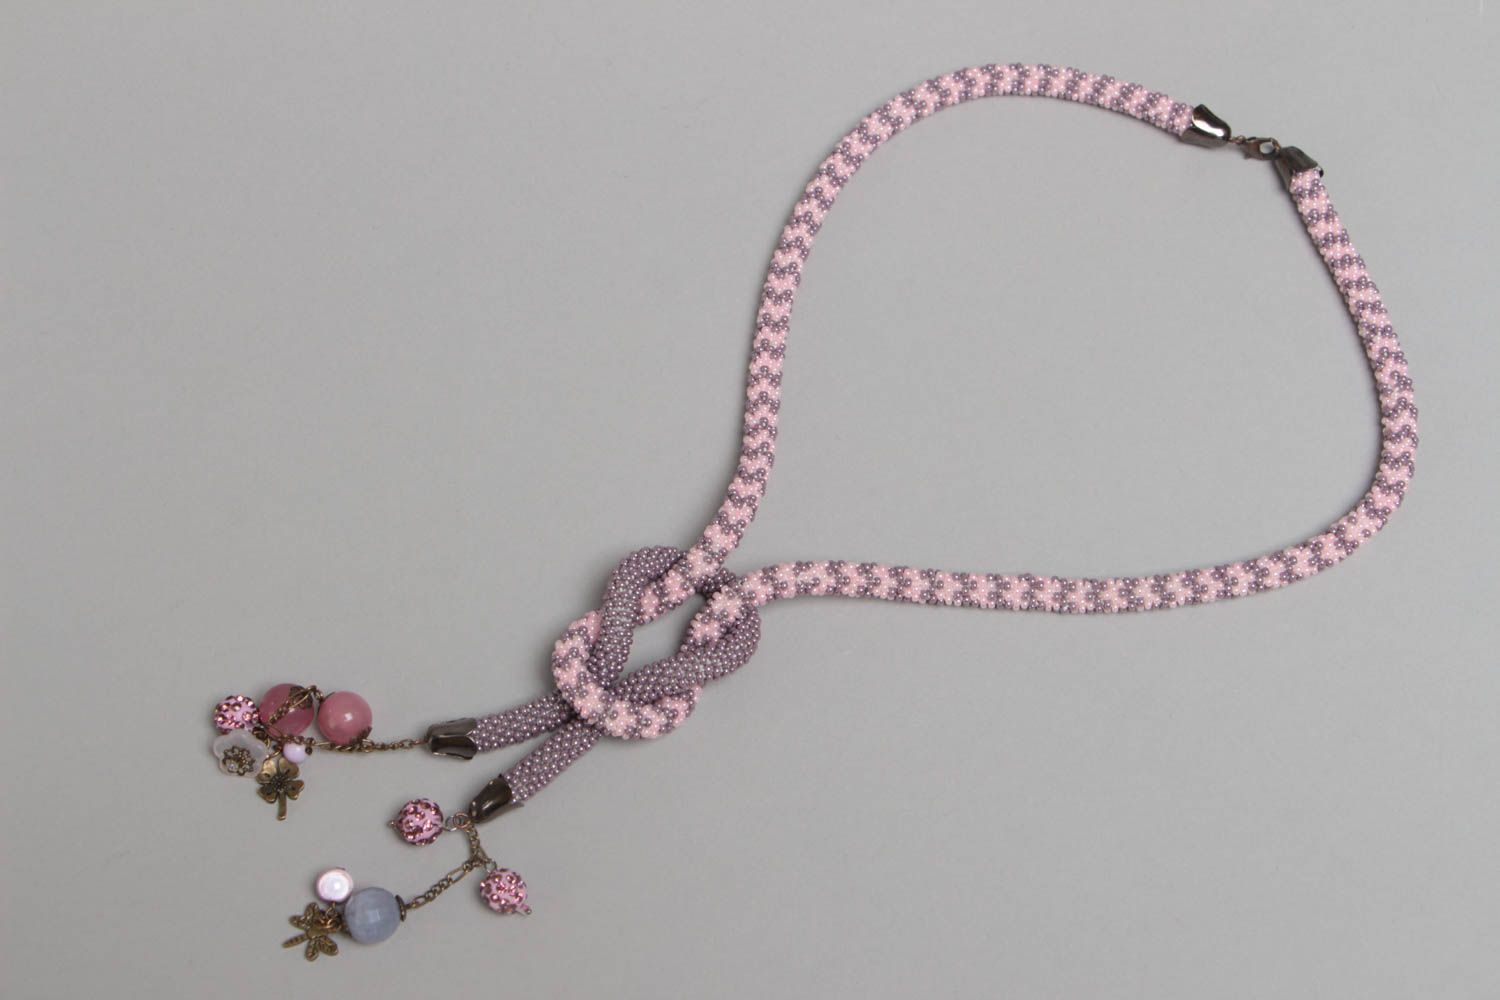 Handmade designer gray and pink beaded cord necklace with charms for women photo 2